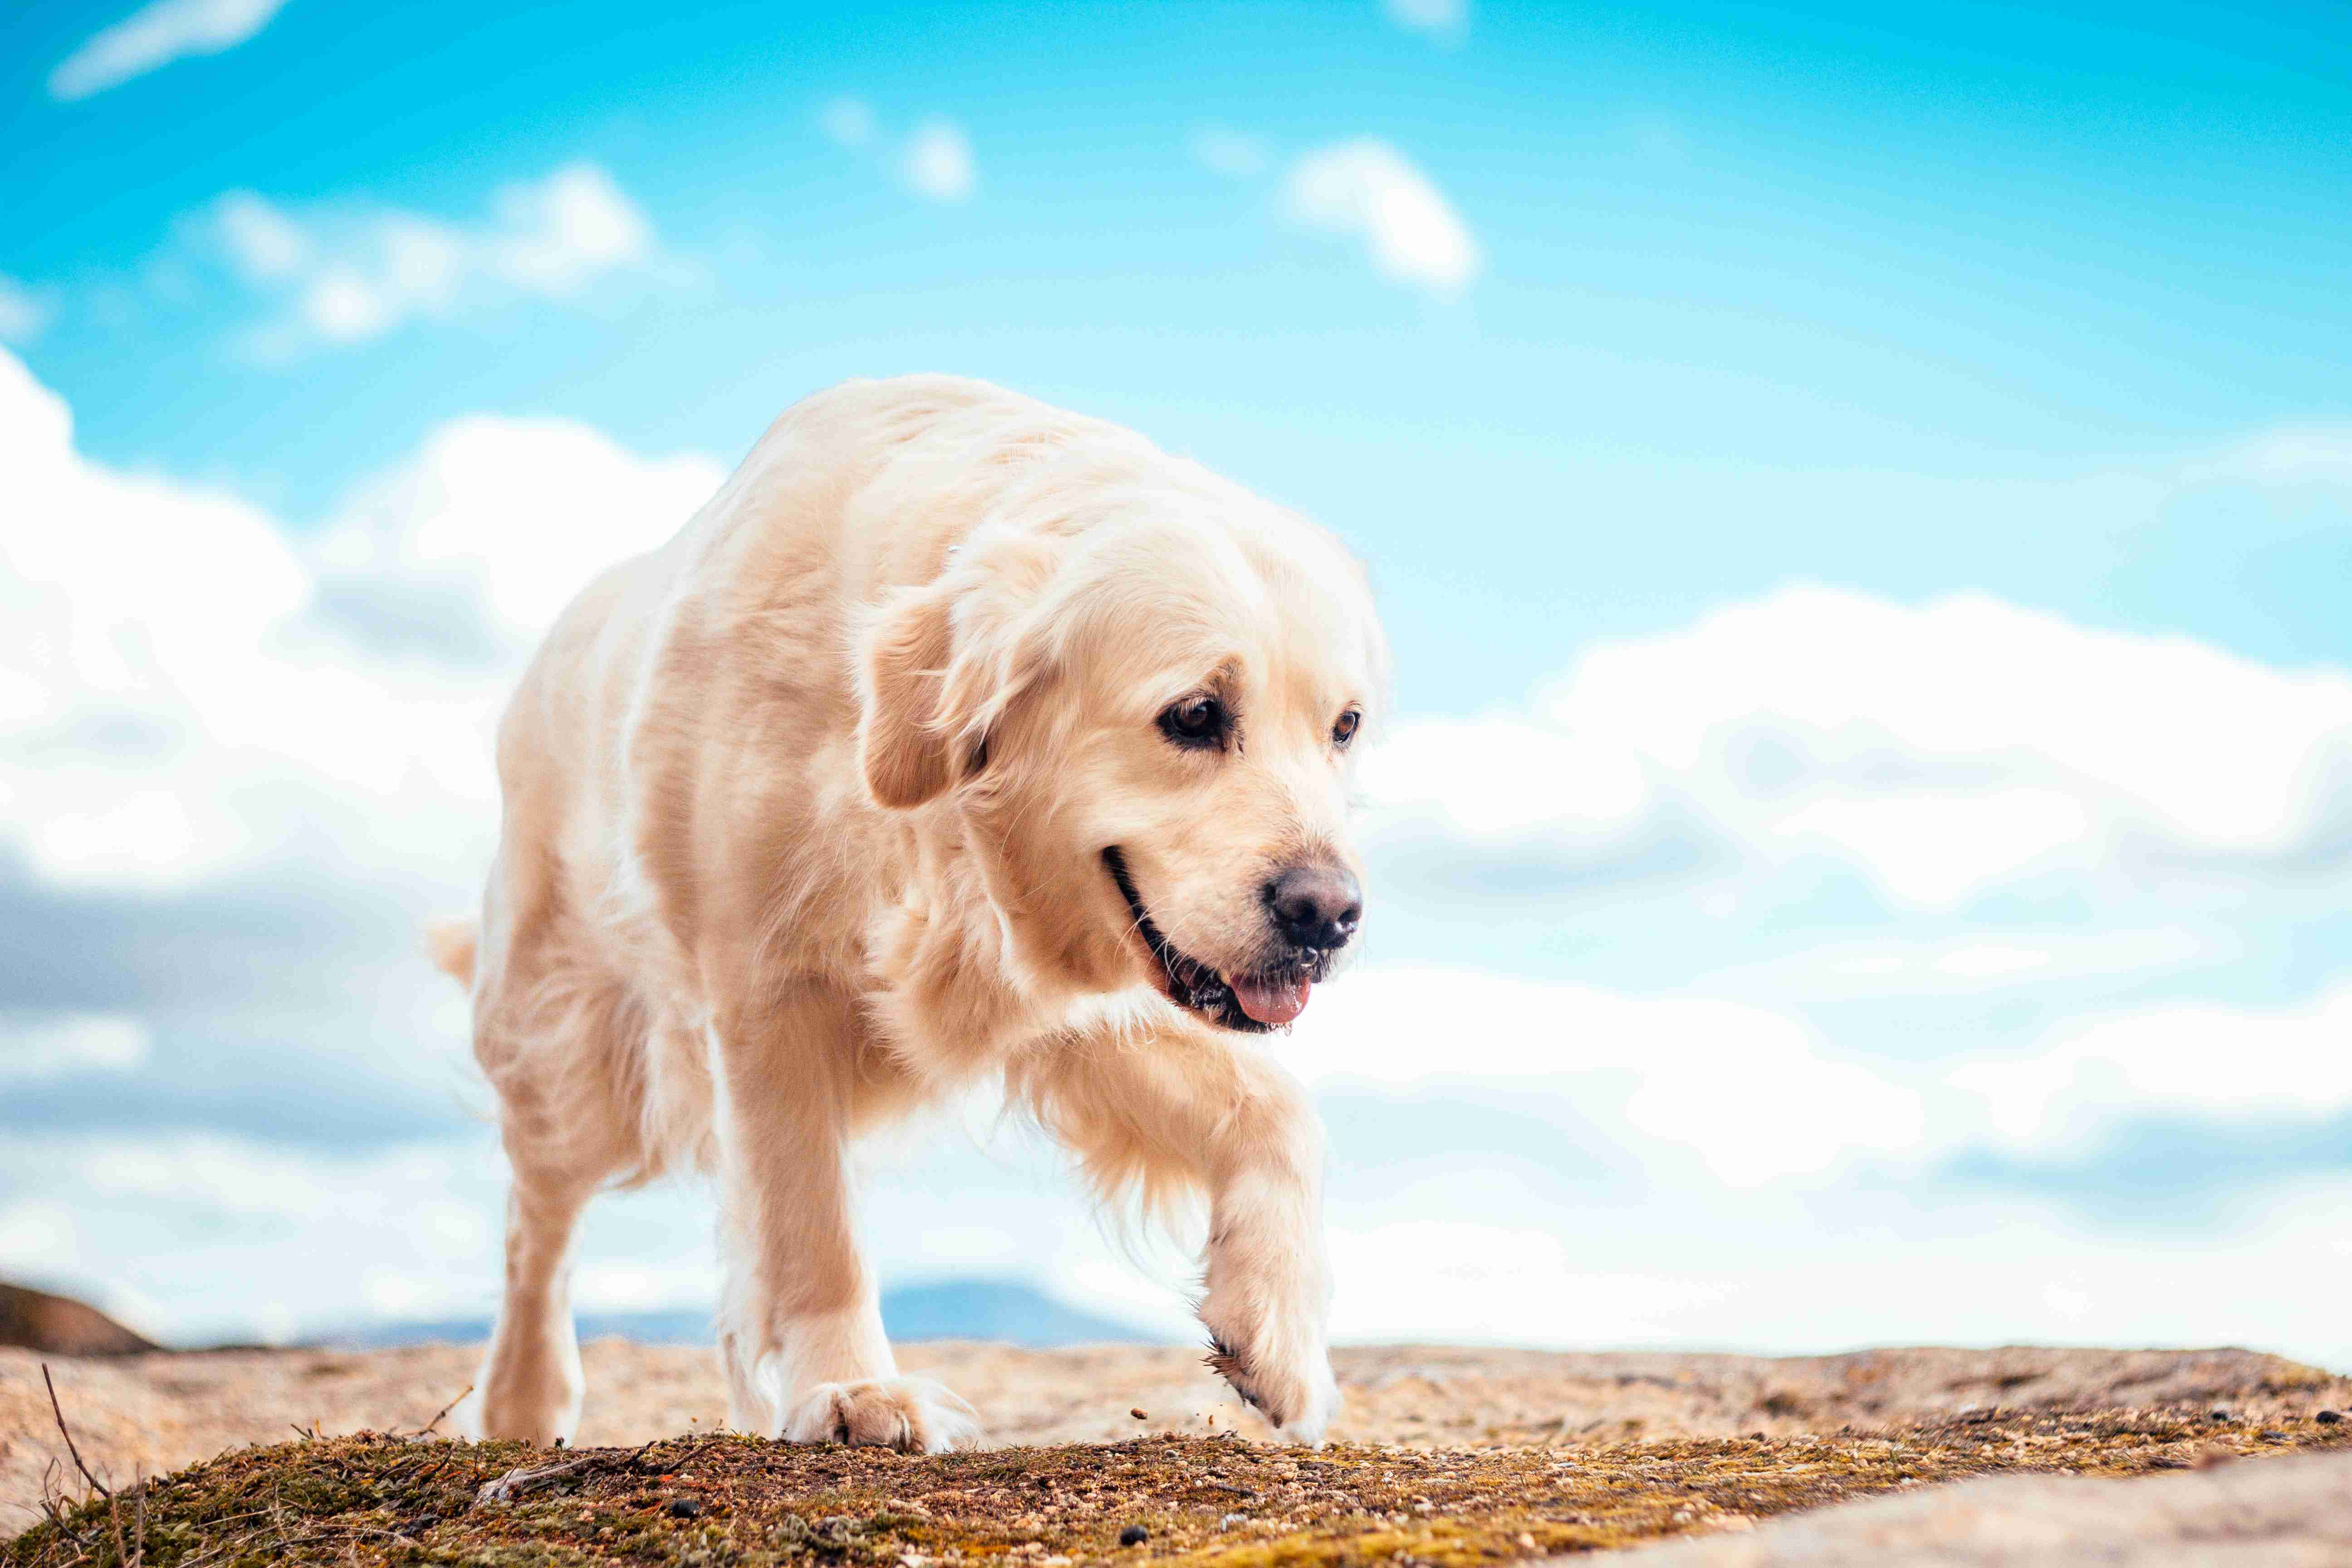 Managing Golden Retriever Fear and Anxiety: Tips for Dealing with Loud Noises and Family Activities